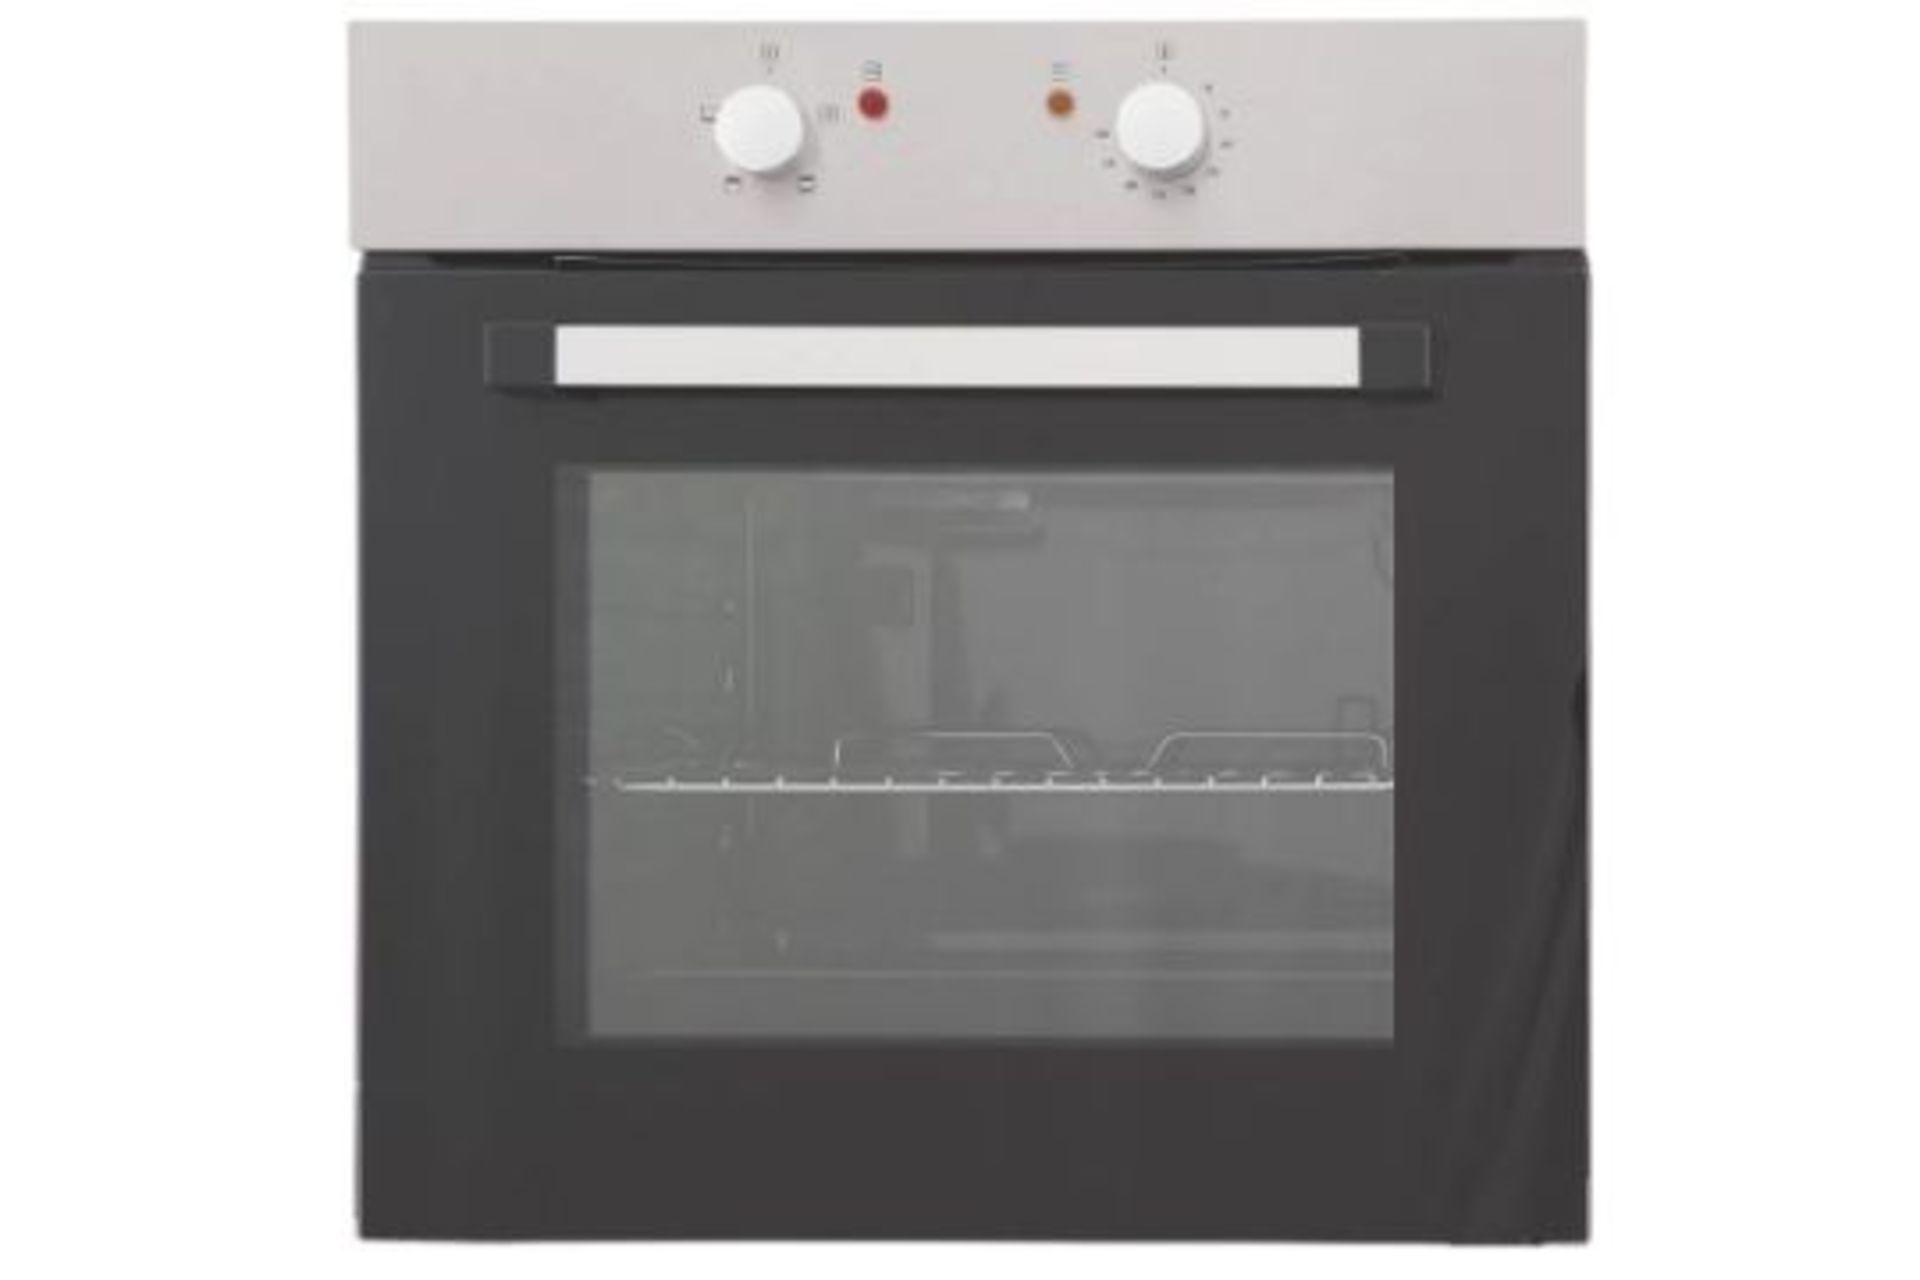 CSB60A Built-in Single Conventional Oven. This conventional, single oven has a 60L capacity with